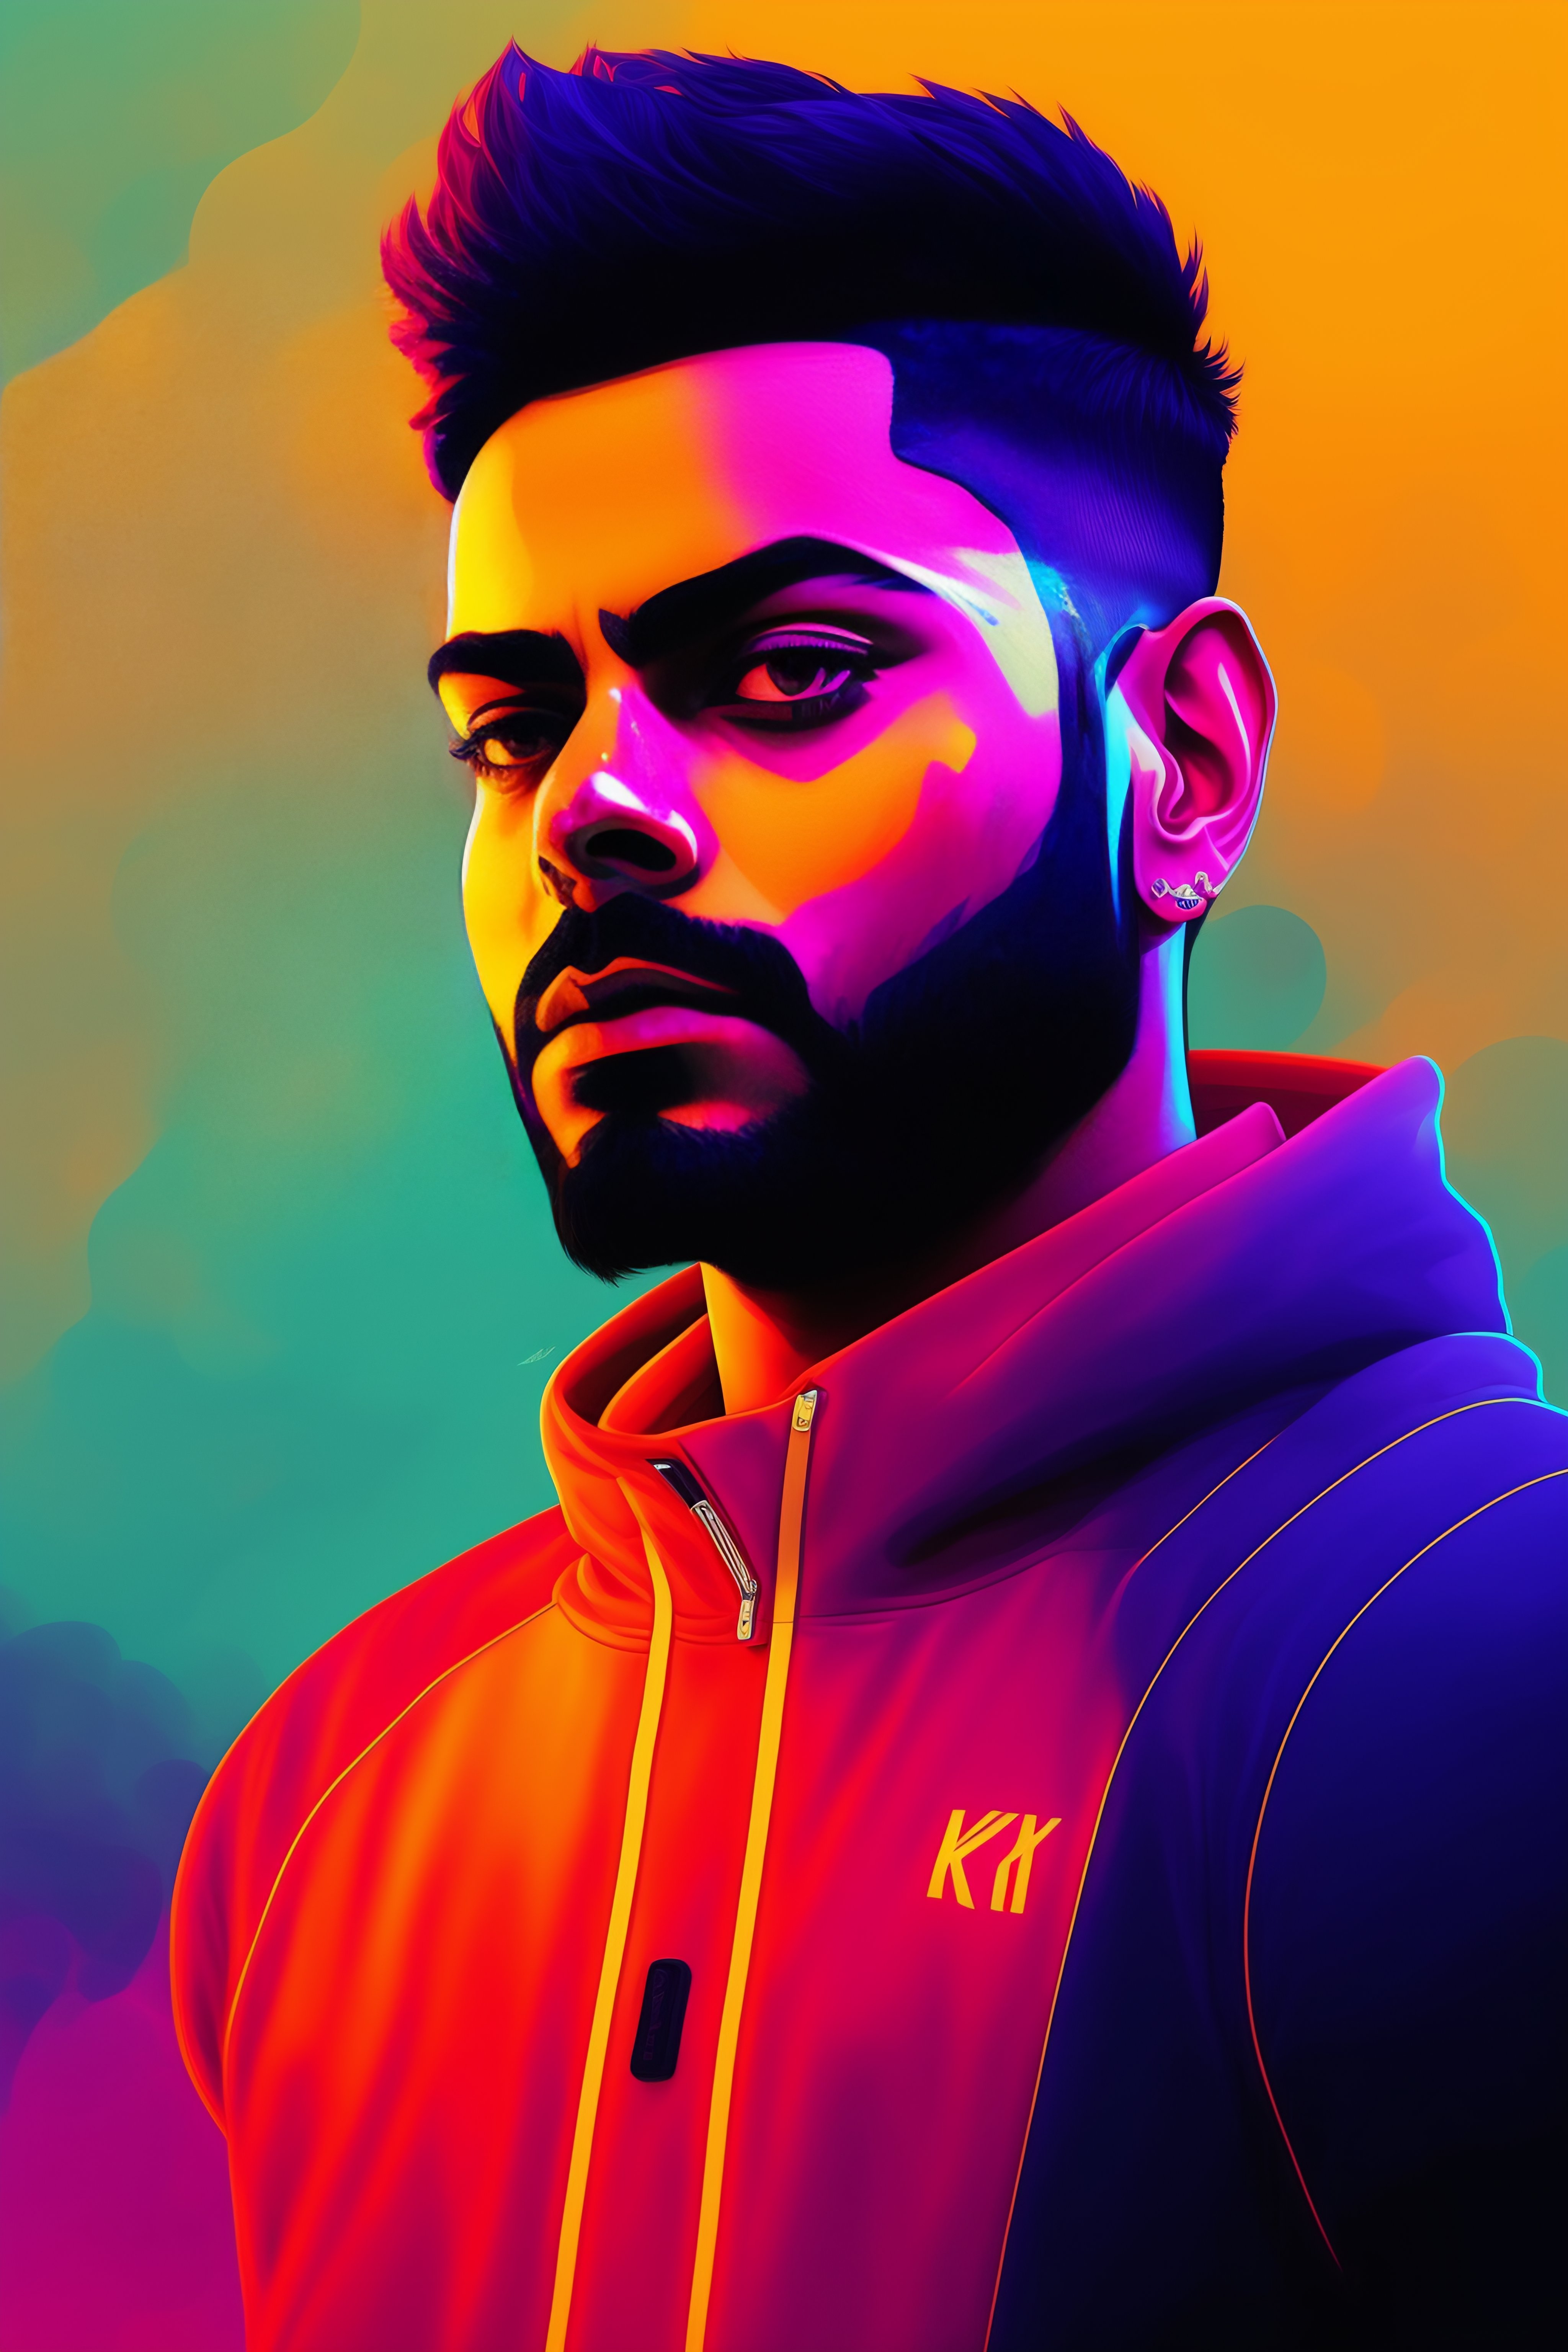 Lexica - Virat Kohli in the style of tomer hanuka and victo ngai and ...